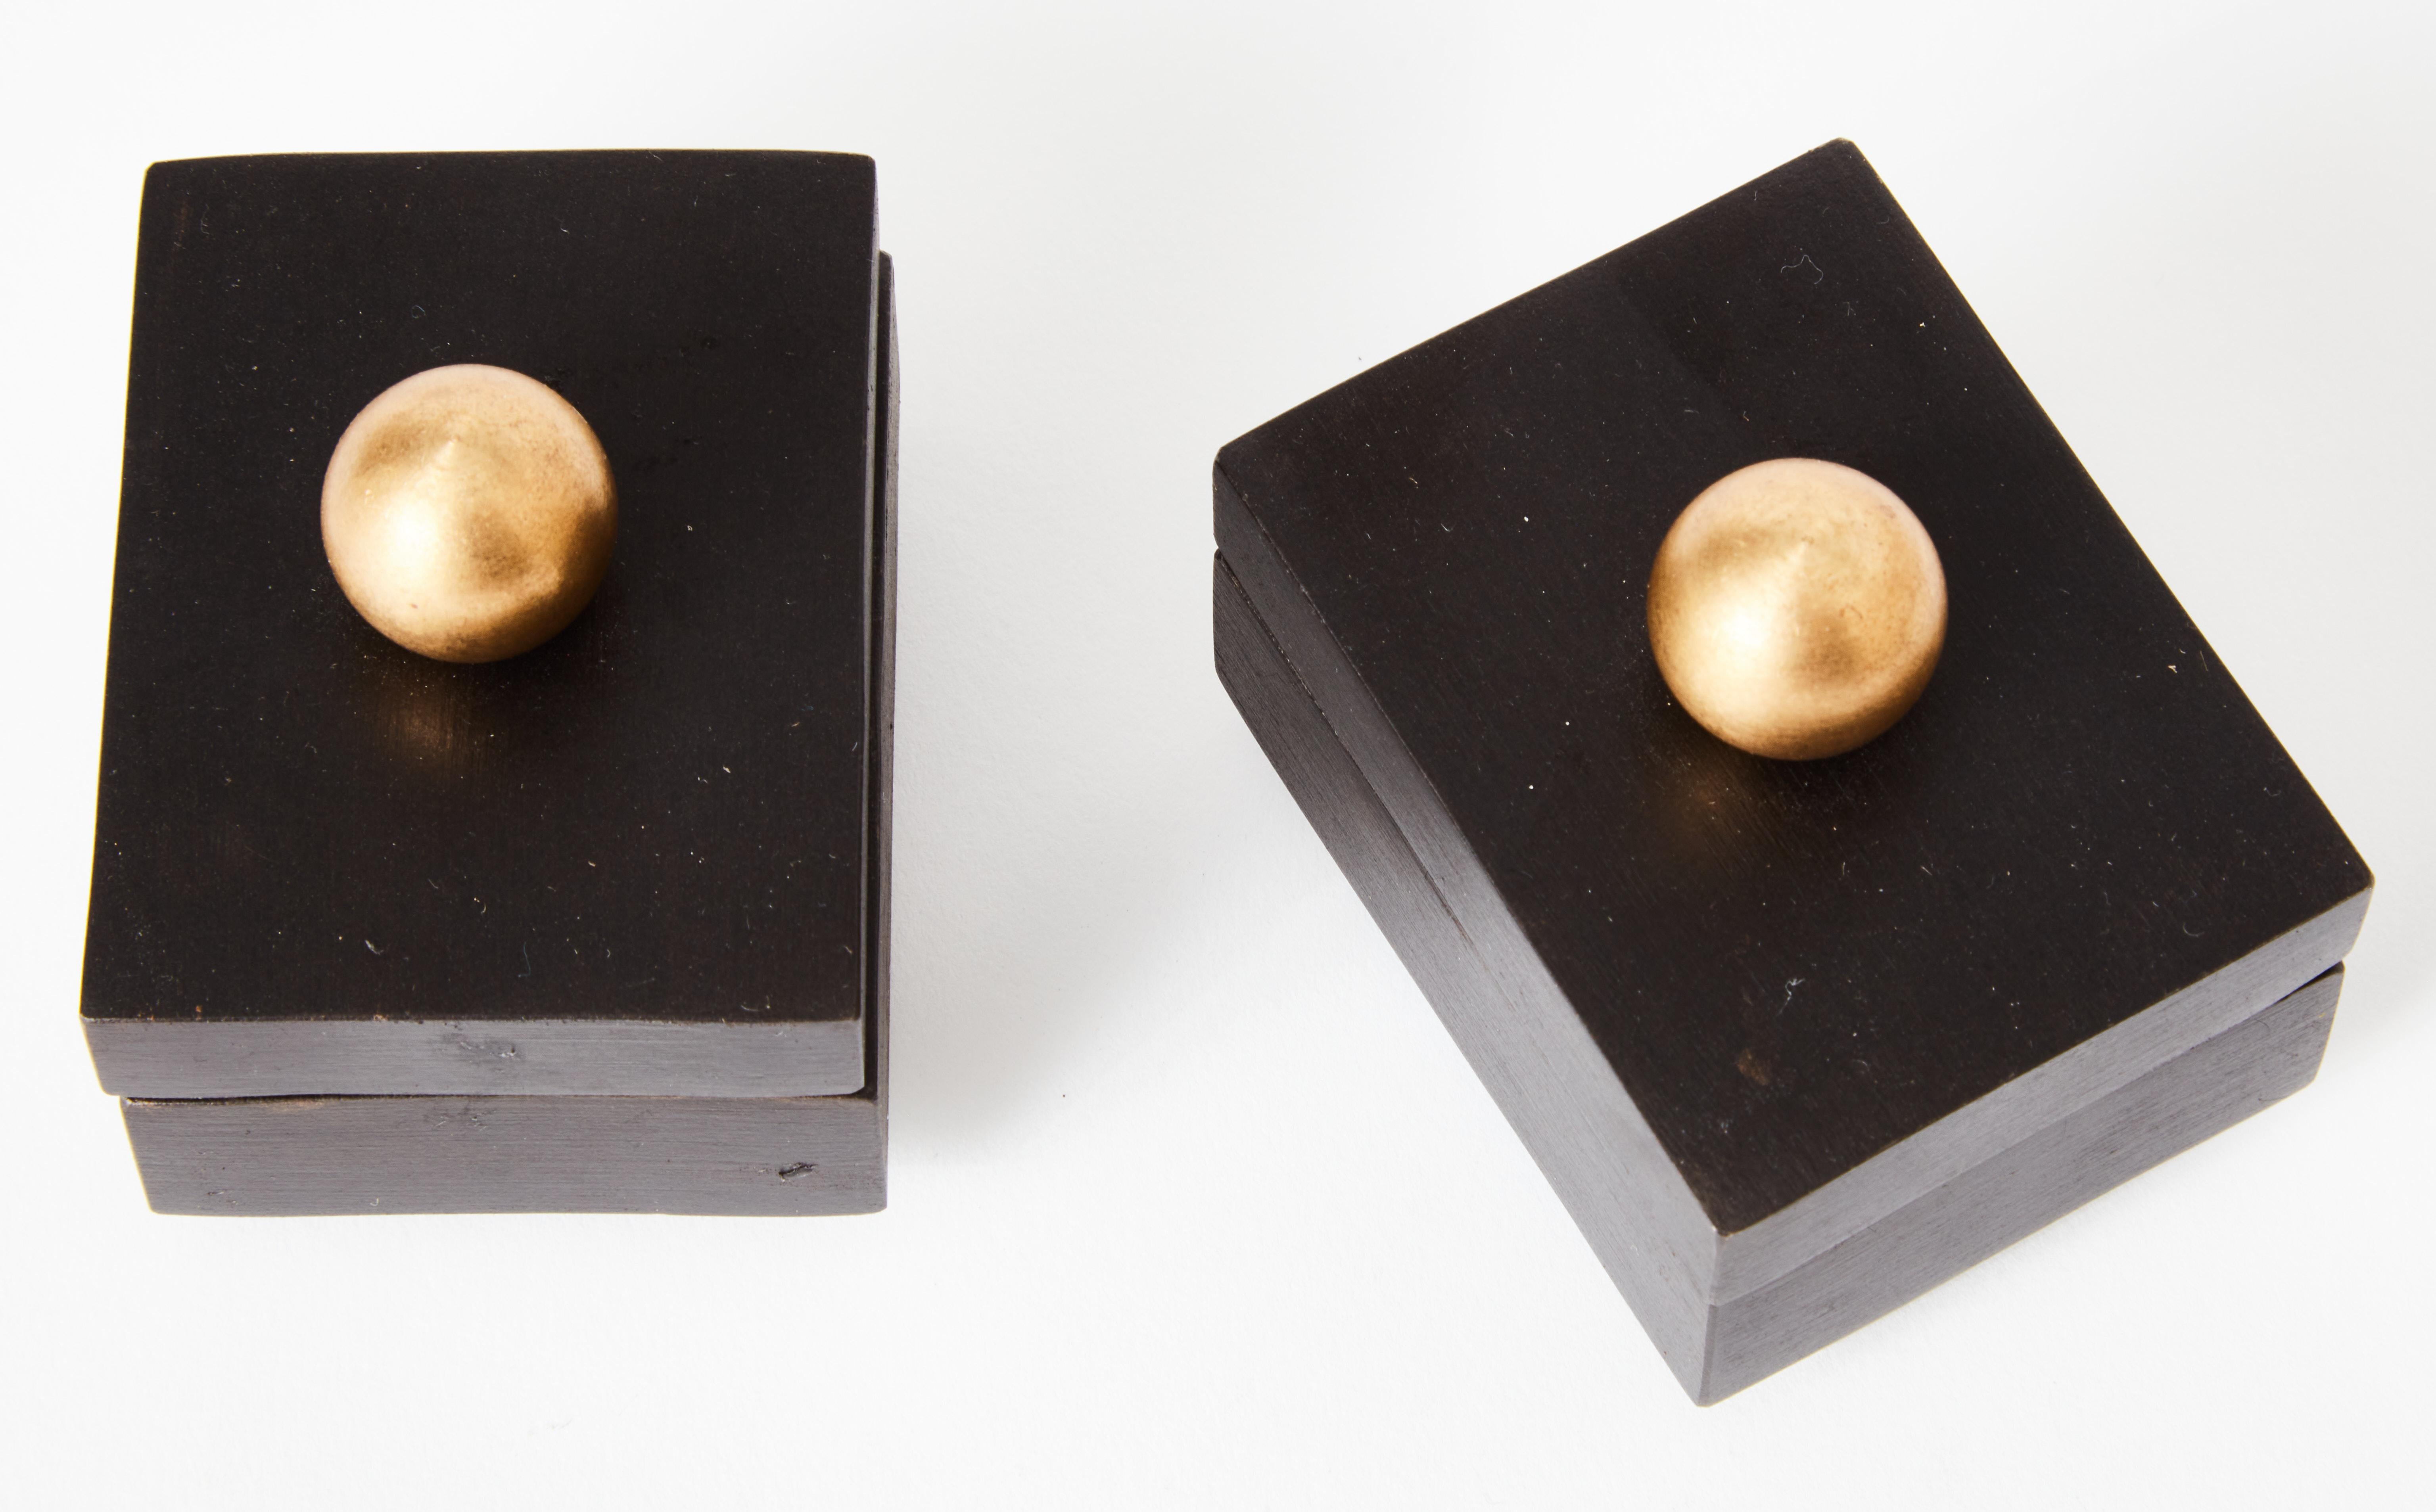 Set of 6 brass dice in a felt-lined steel box - with brass topped lid and feet.

The steel and brass have been oxidized prior to patinating with our unique statuary bronze formula. The whole piece is then sealed with a satin clear finish and waxed.